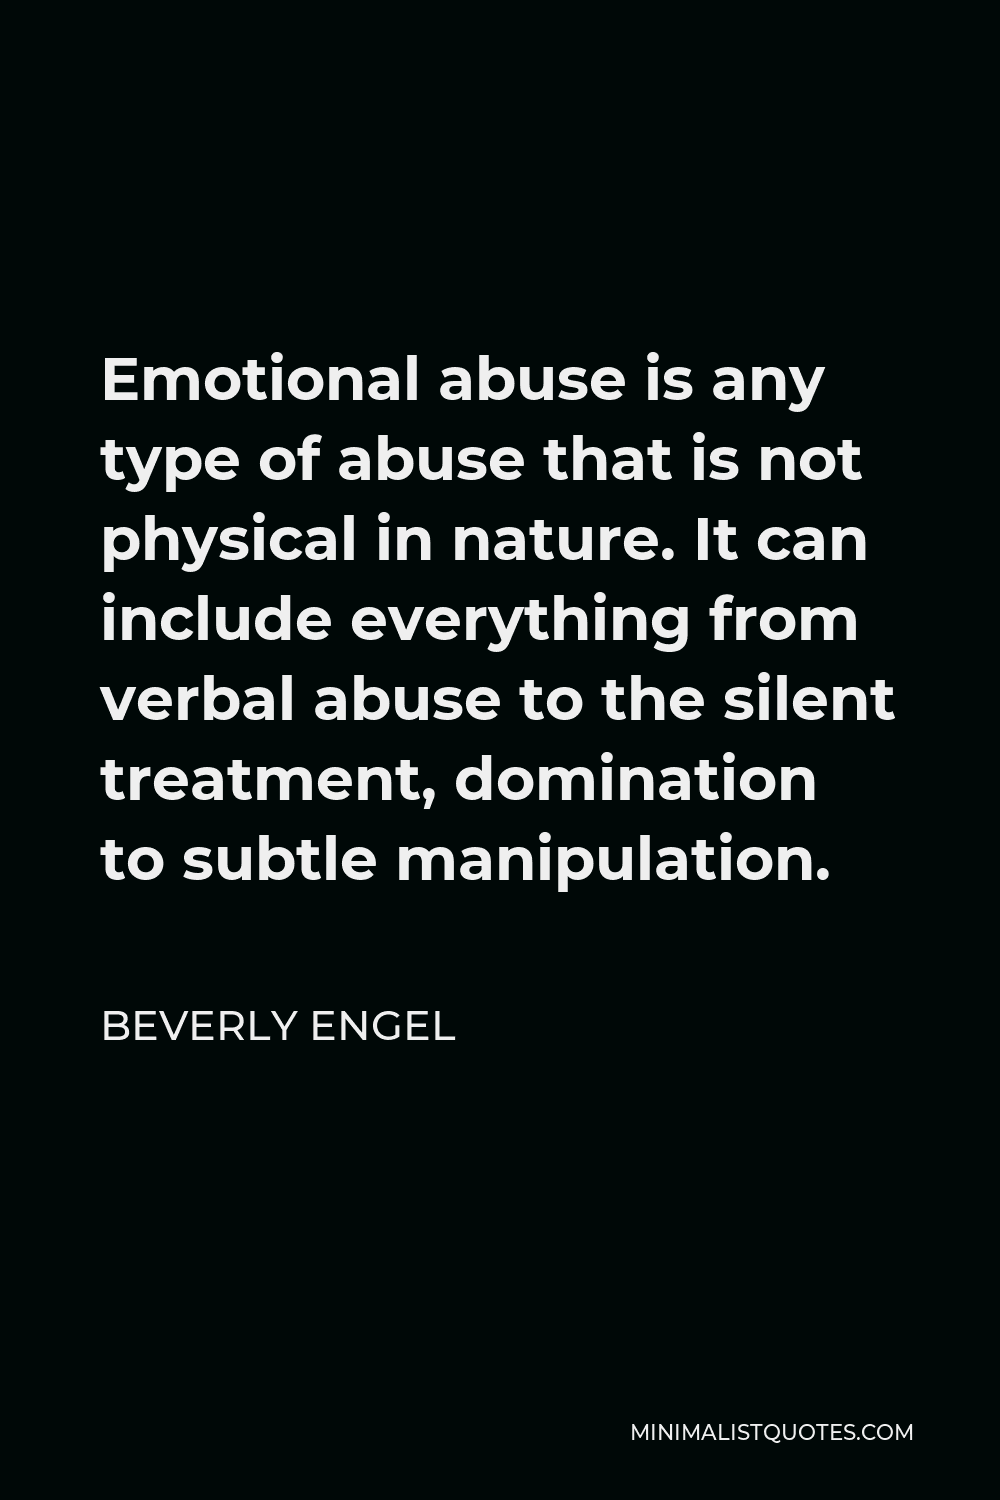 Beverly Engel Quote - Emotional abuse is any type of abuse that is not physical in nature. It can include everything from verbal abuse to the silent treatment, domination to subtle manipulation.